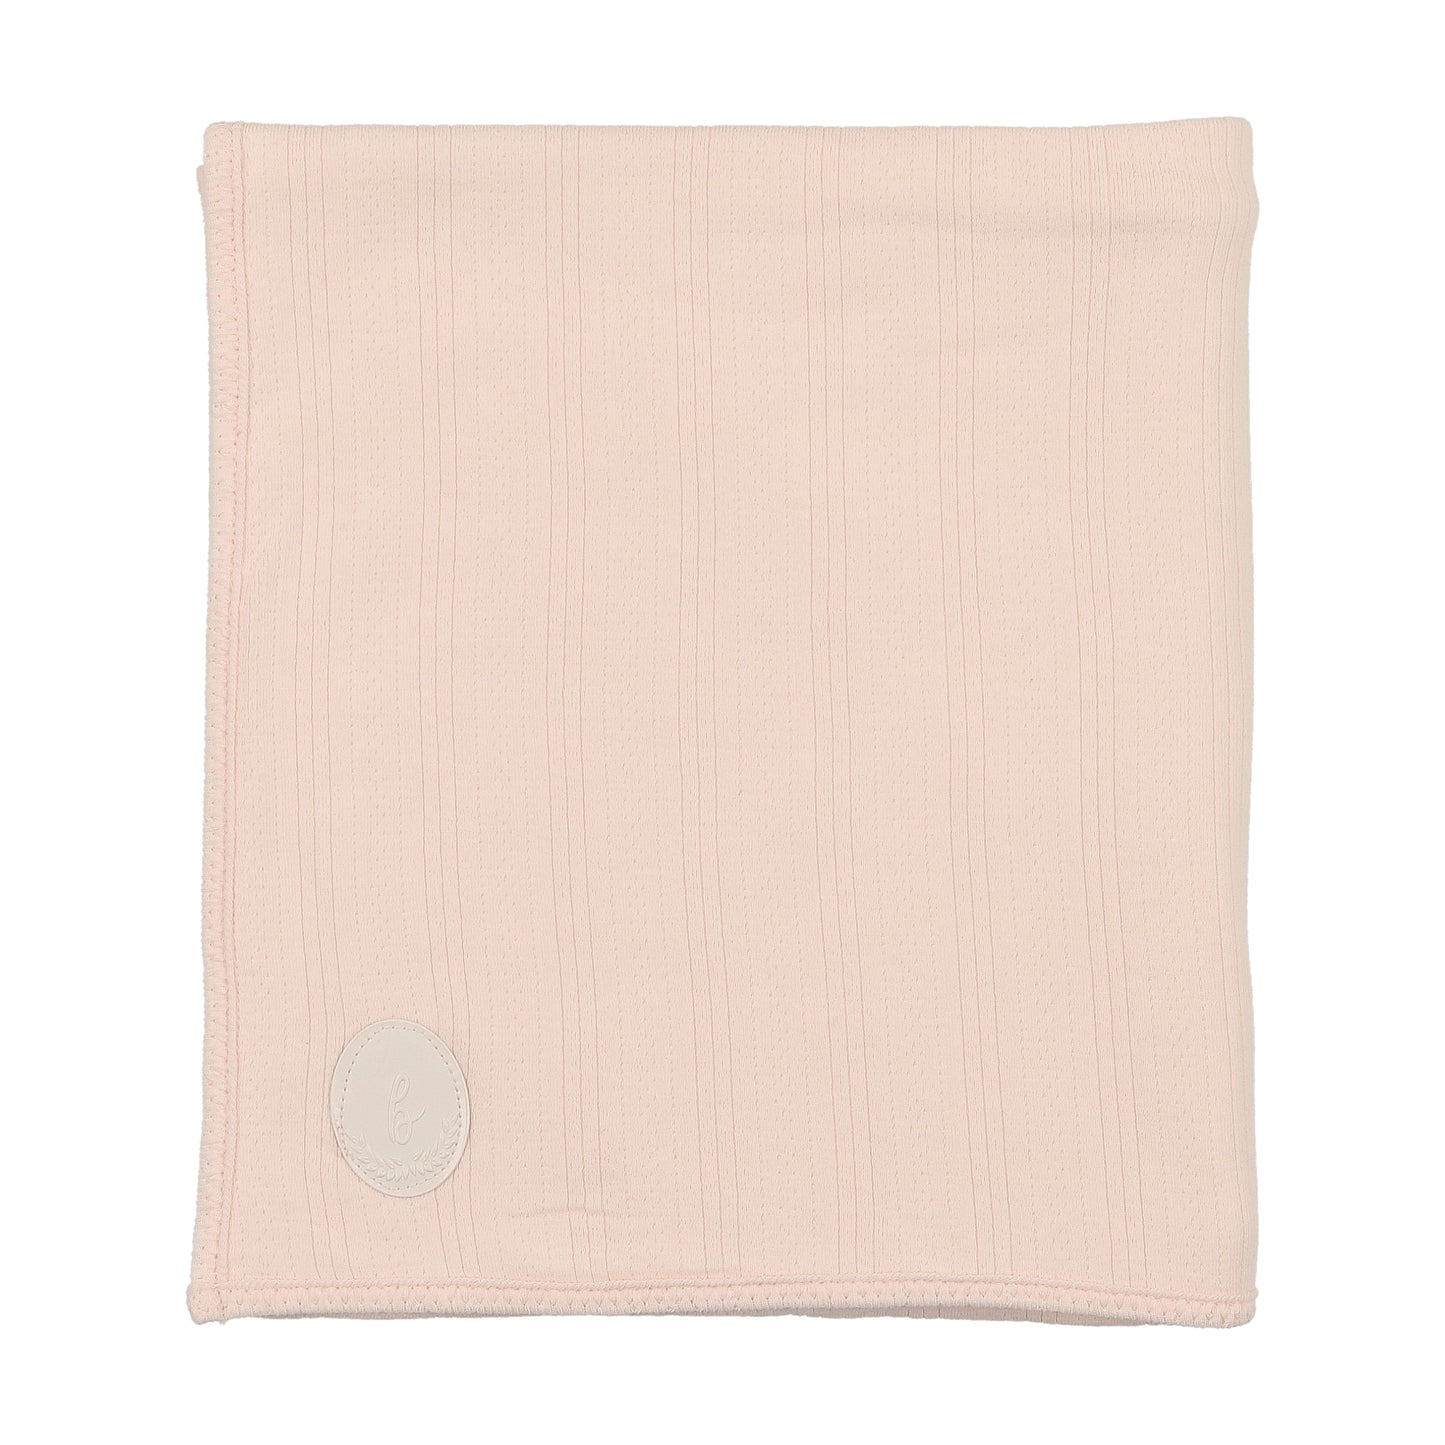 BEE & DEE BLOSSOM PINK POINTELLE ENGRAVED PLAQUE BLANKET [FINAL SALE]